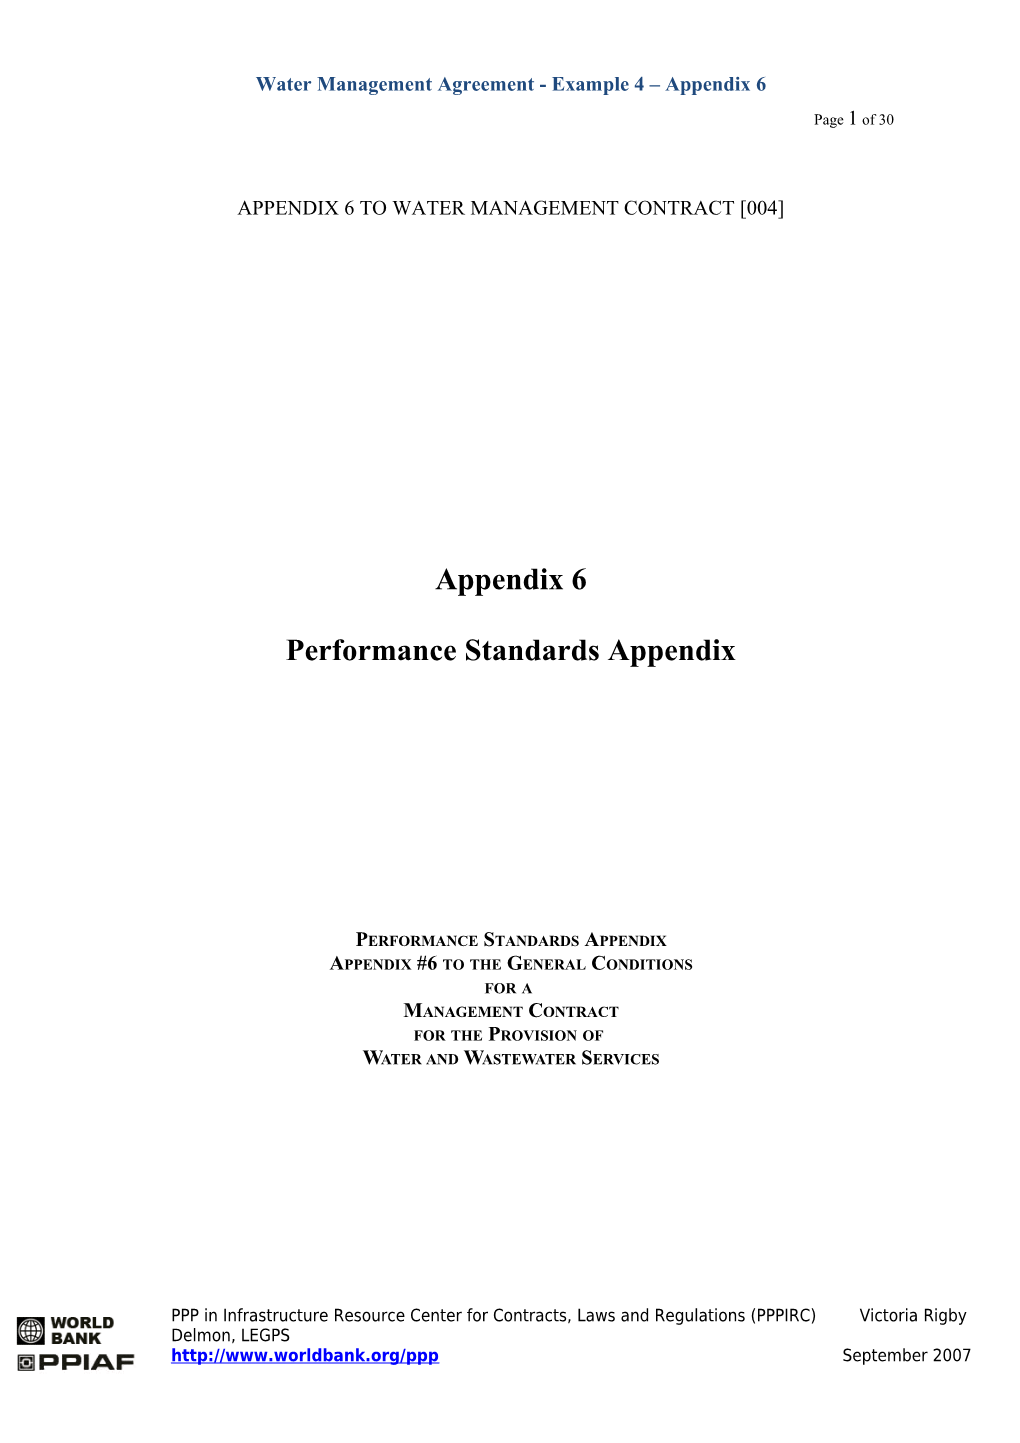 Appendix 6 to Water Management Contract 004